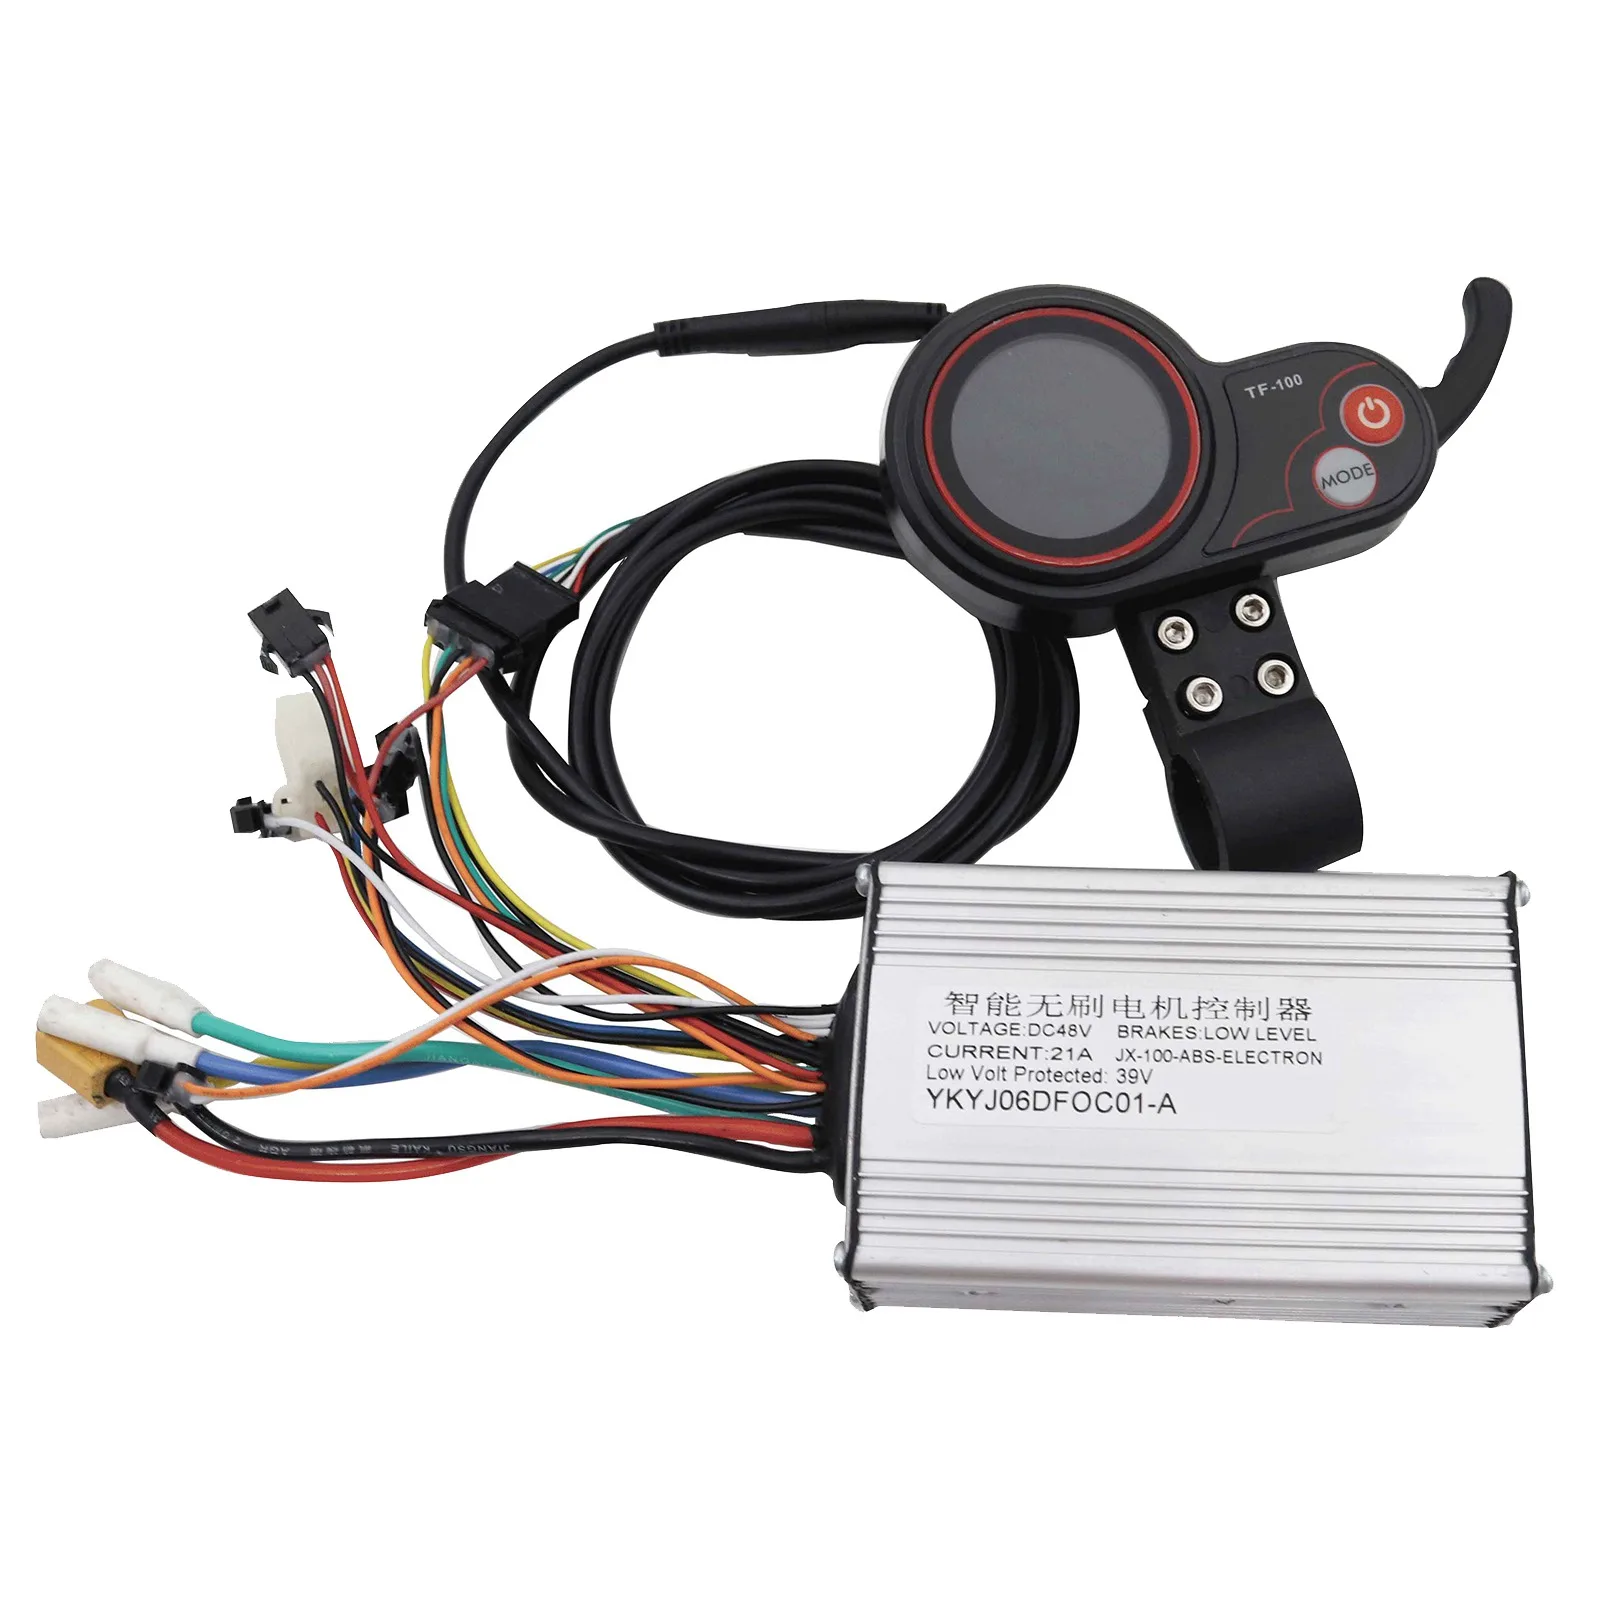 

48V 21A Electric Scooter Brushless Controller+TF-100 LCD Display Throttle Meter for Kugoo M4 Pro Electric Scooter